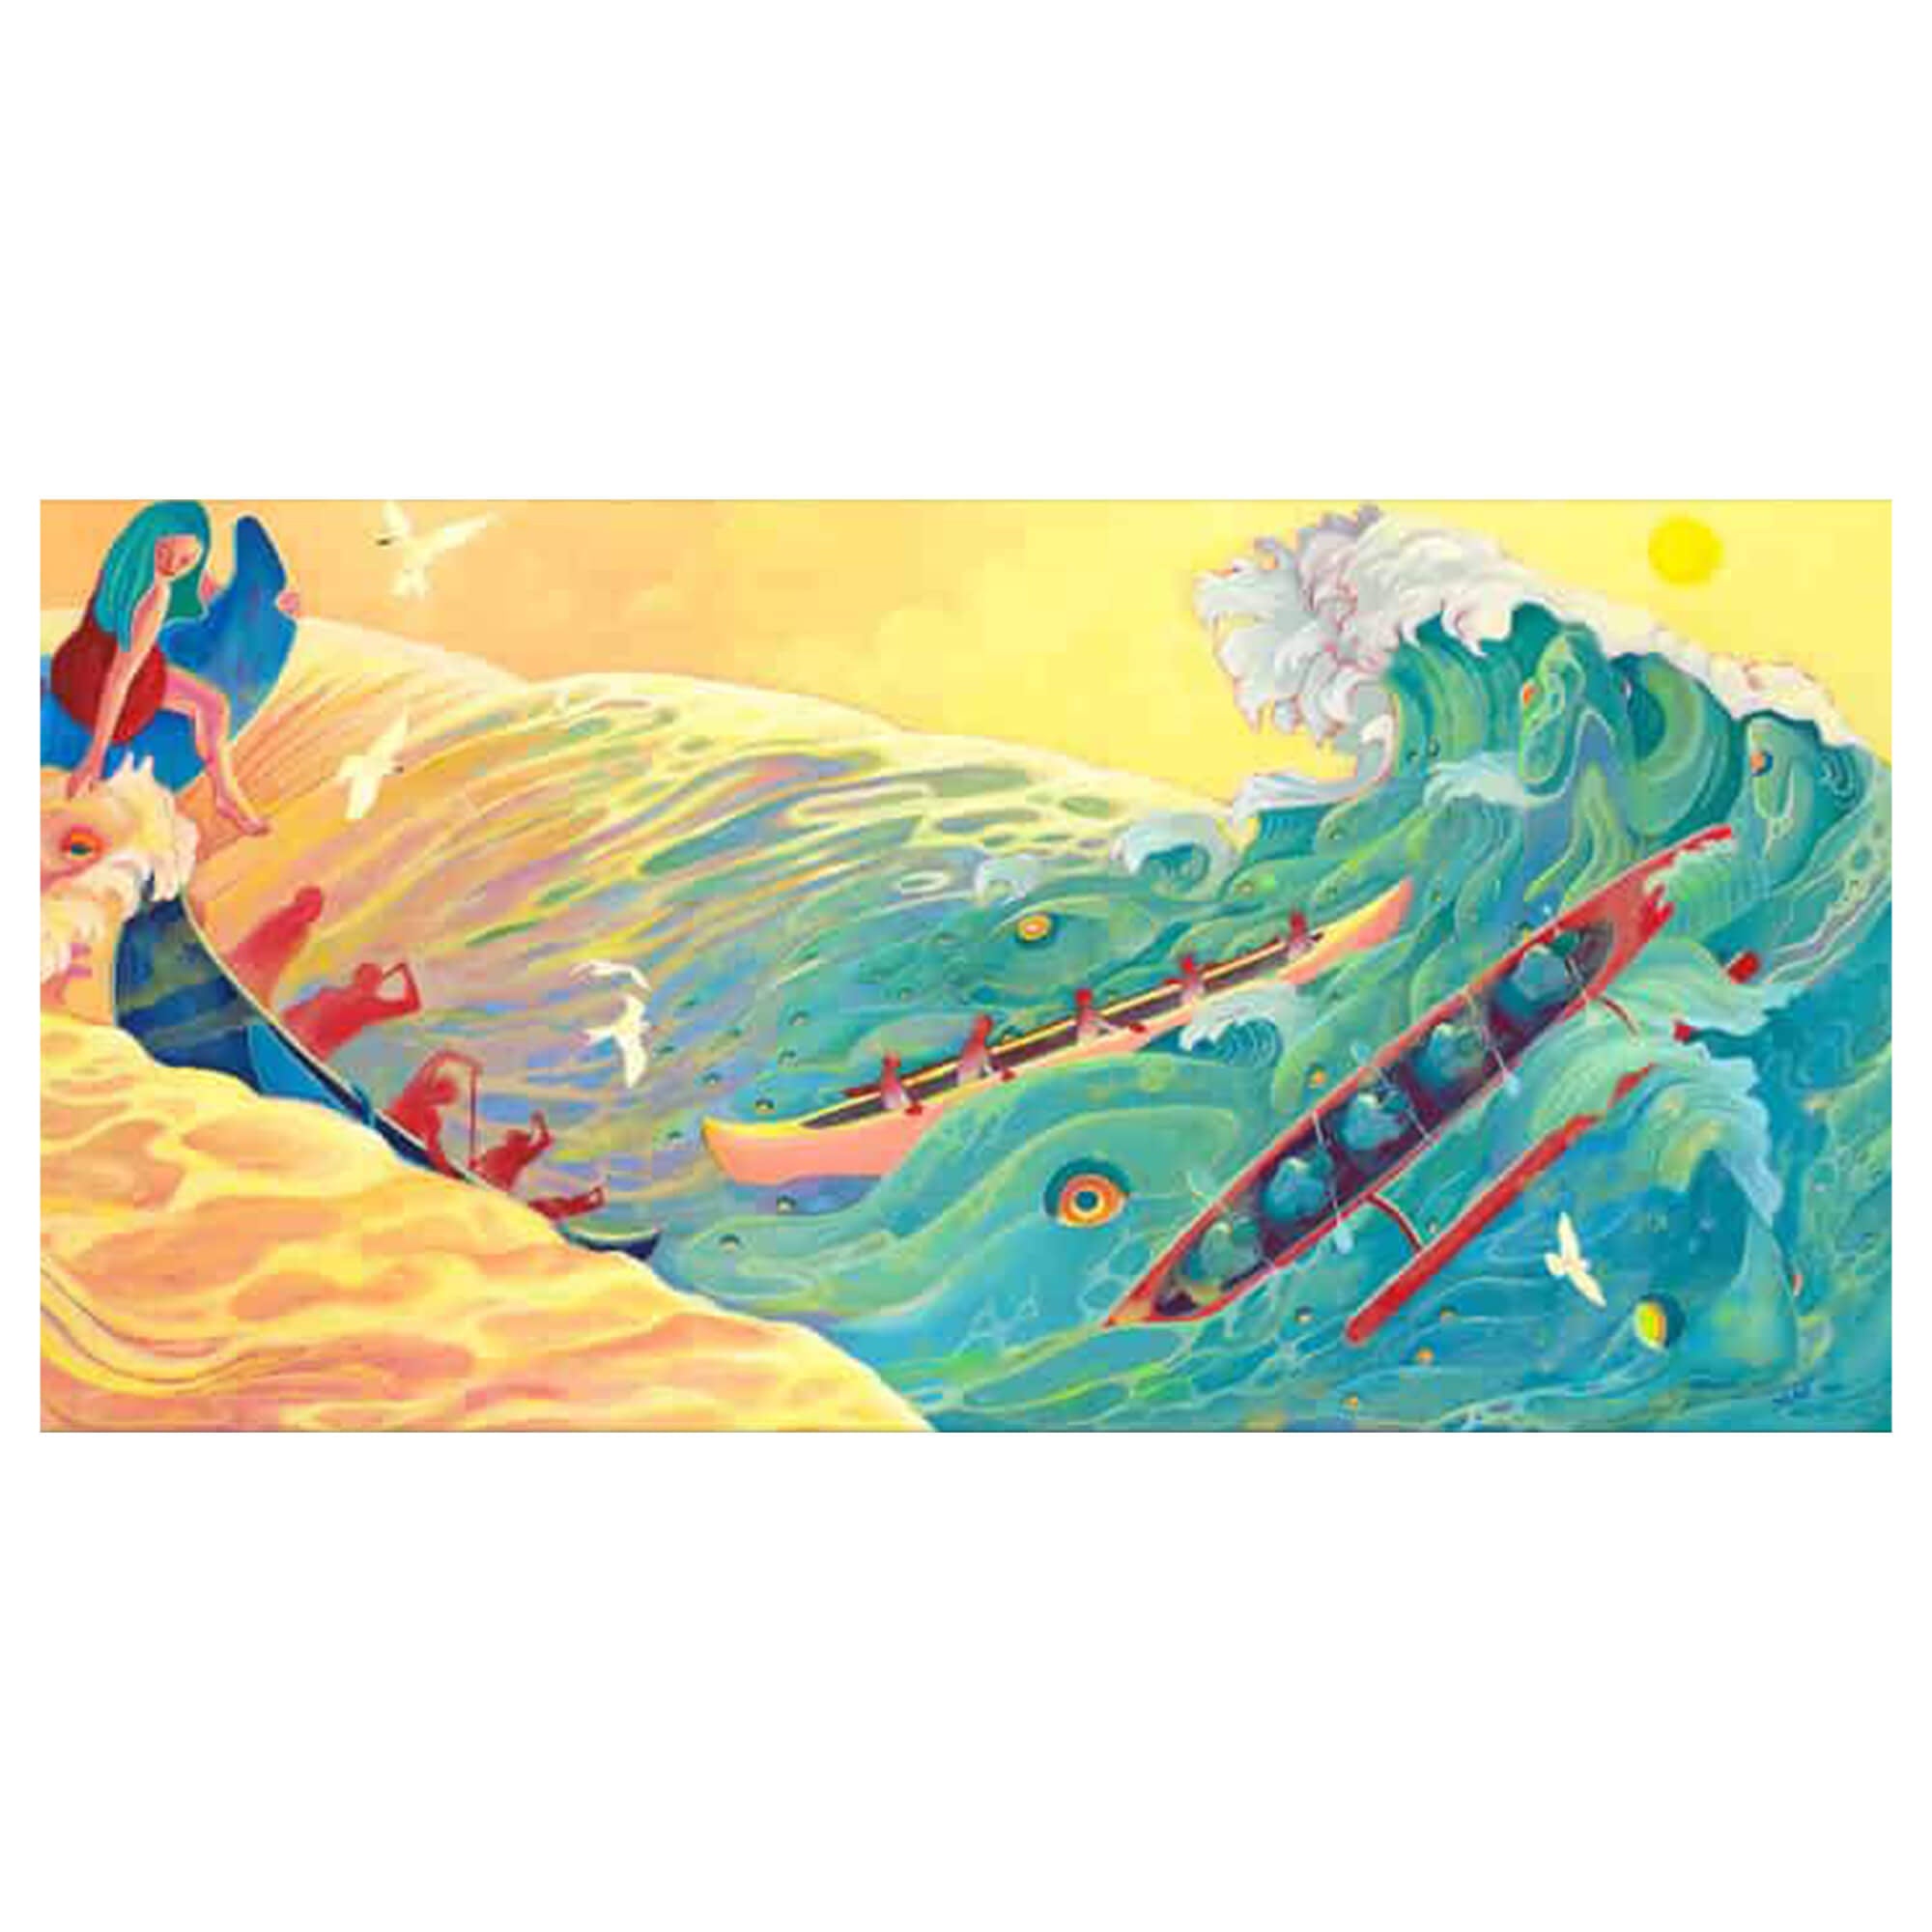 A matted art print of people on outrigger canoes battling Hawaiian big waves by Hawaii artist Mae Waite